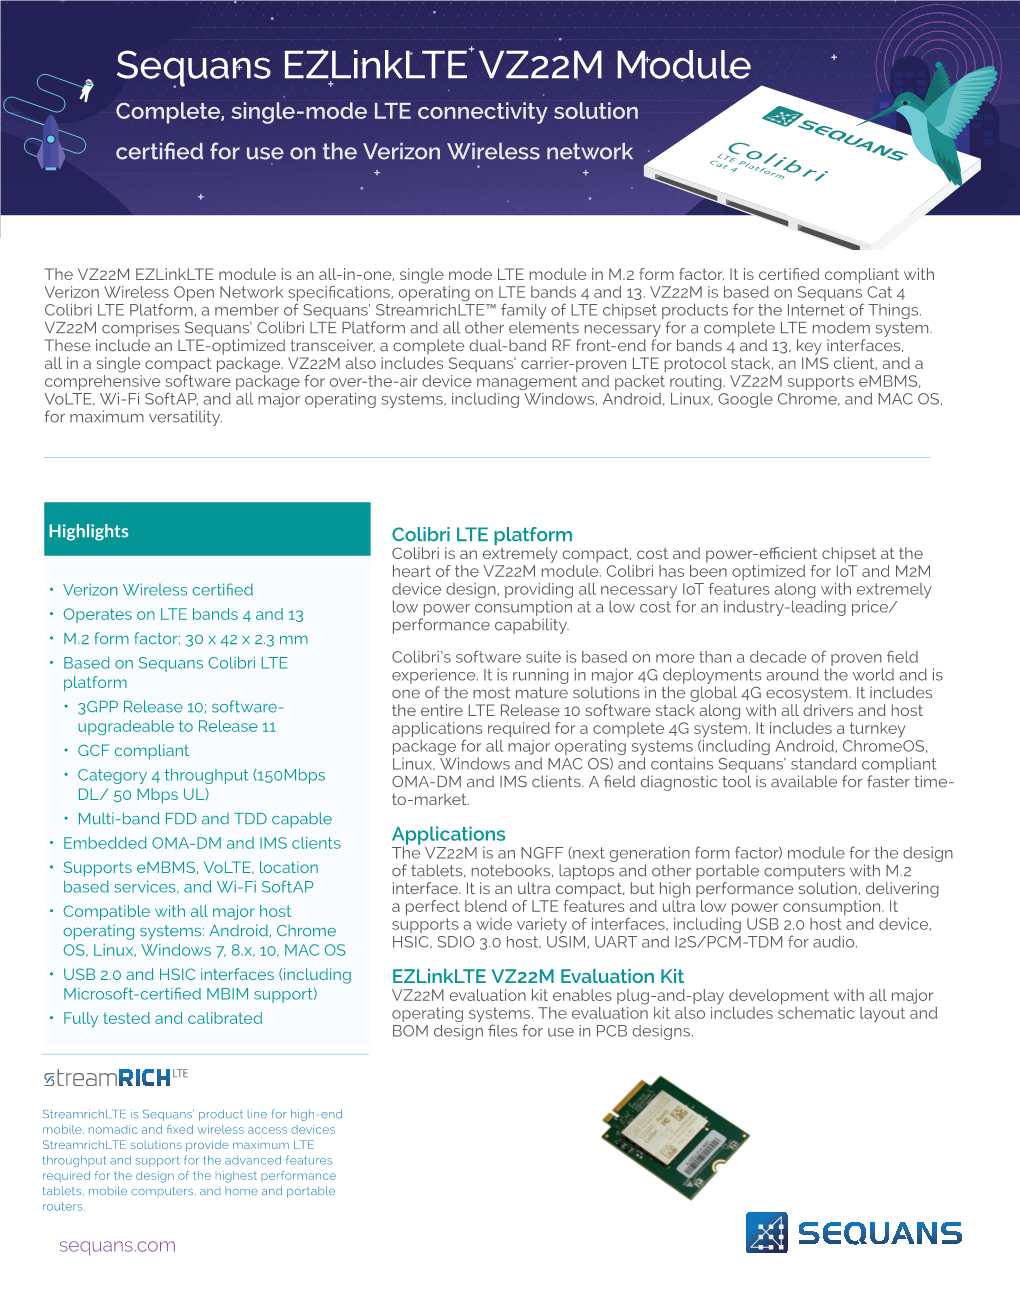 Sequans Ezlinklte VZ22M Module Complete, Single-Mode LTE Connectivity Solution Certified for Use on the Verizon Wireless Network